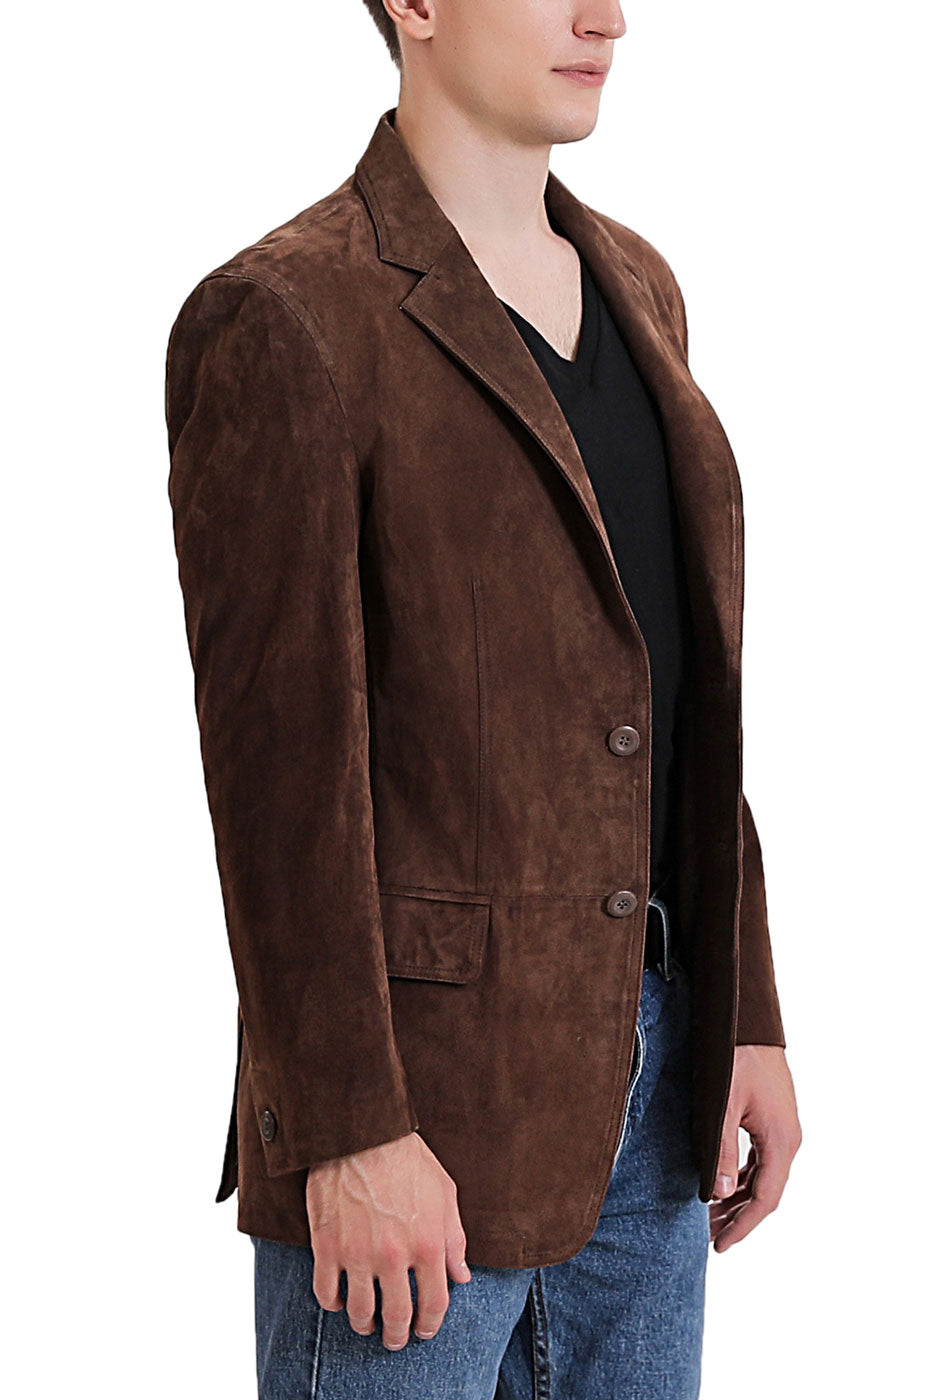 BGSD Men Grant Two-Button Suede Leather Blazer